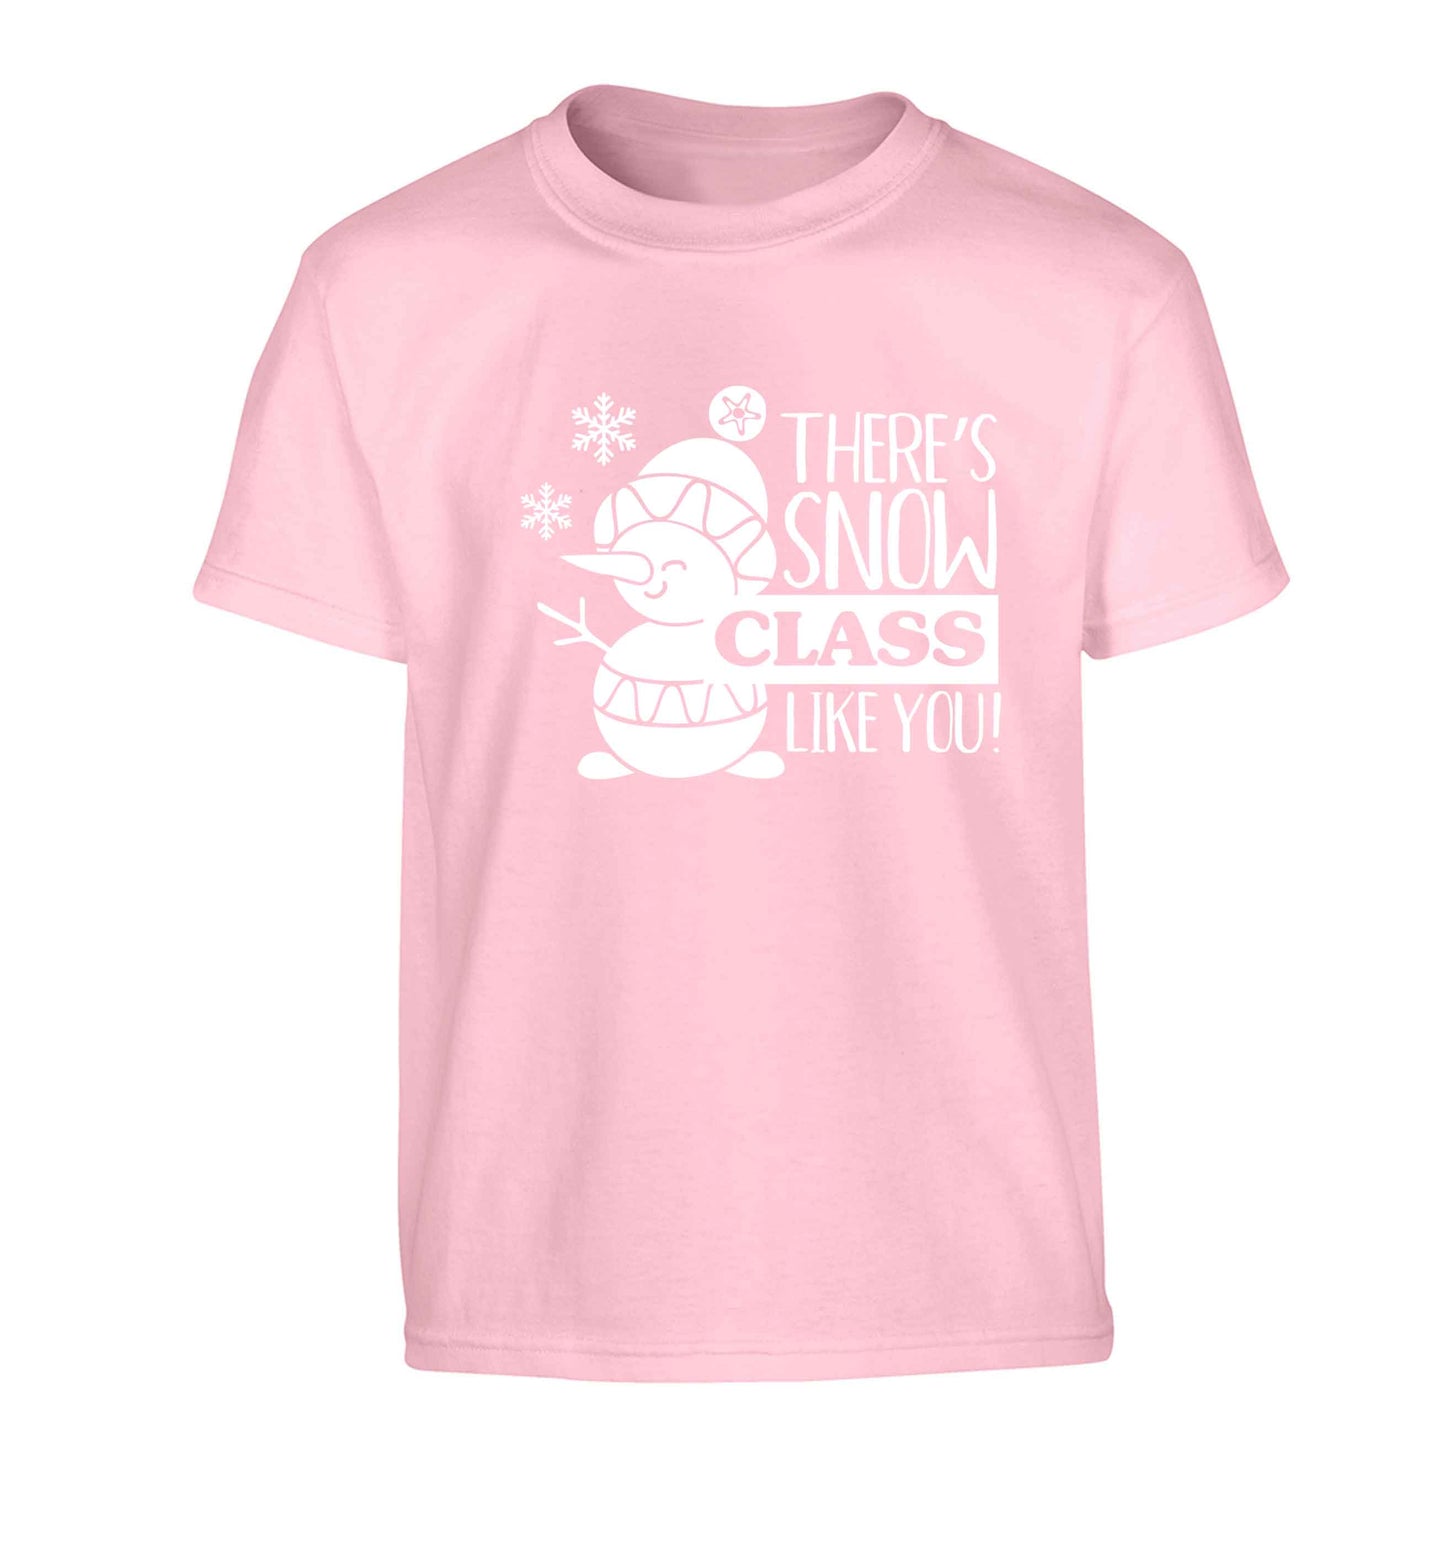 There's snow class like you Children's light pink Tshirt 12-13 Years